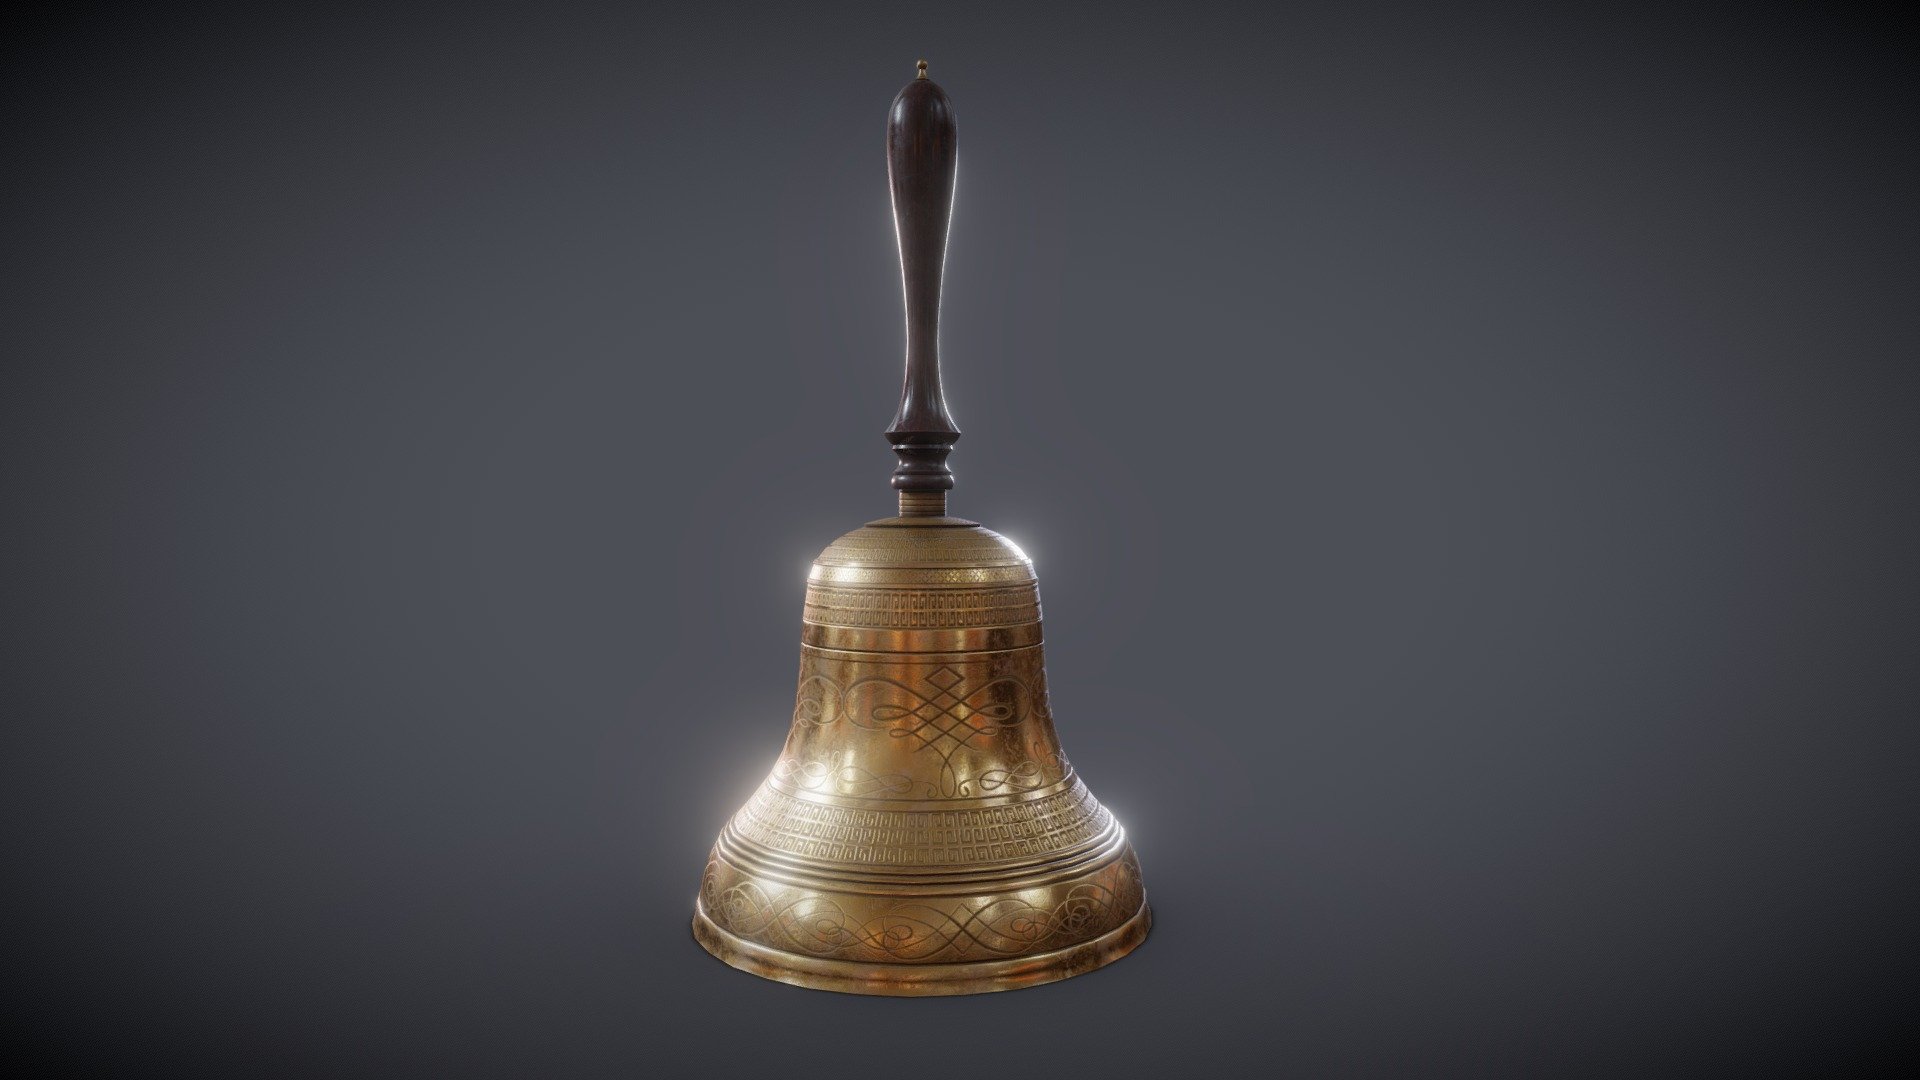 Textures created in Substance Painter and exported in .PNG PBR rough/metallic formats.

Logically named objects, materials and textures.

Modelled in Blender.2.92.

Modelled to real world scales.

Fully and efficiently UV unwrapped.

Tested in Marmoset Viewer, Marmoset Toolbag, EEVEE and Cycles.


Formats included



.Blend (Native)

.FBX

.DAE

.OBJ


Objects included



Bell


Textures included in .png format.
Bell -4K




Base Colour

Roughness

Normal (OpenGL)

Metallic

AO


Poly Counts



Face count: 3,856

Vert count: 3,826

Triangulated count: 7,640
 - Handheld Bell Ringer - Buy Royalty Free 3D model by PBR3D 3d model